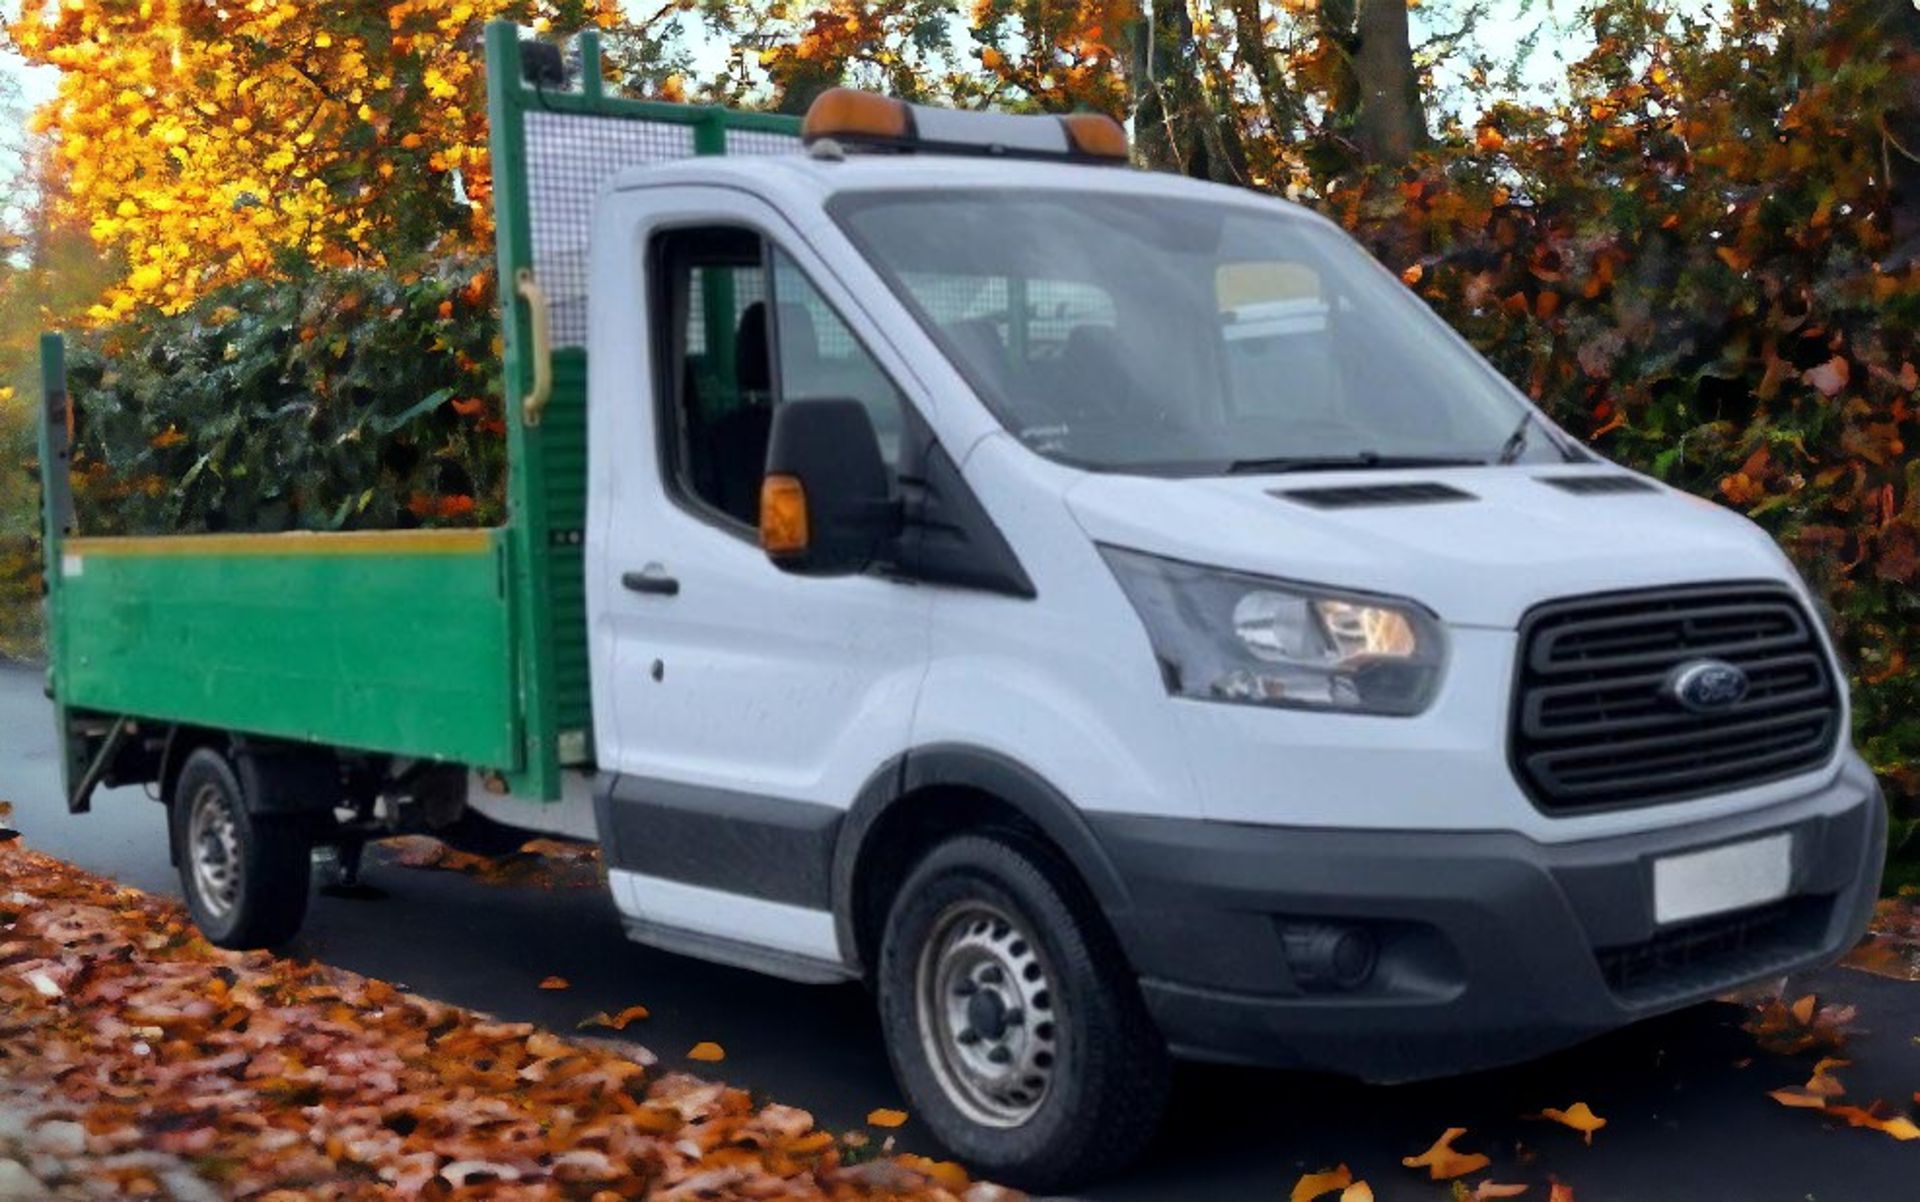 2019 FORD TRANSIT T350 LWB DROPSIDE TRUCK - READY FOR HEAVY-DUTY HAULING - Image 2 of 16